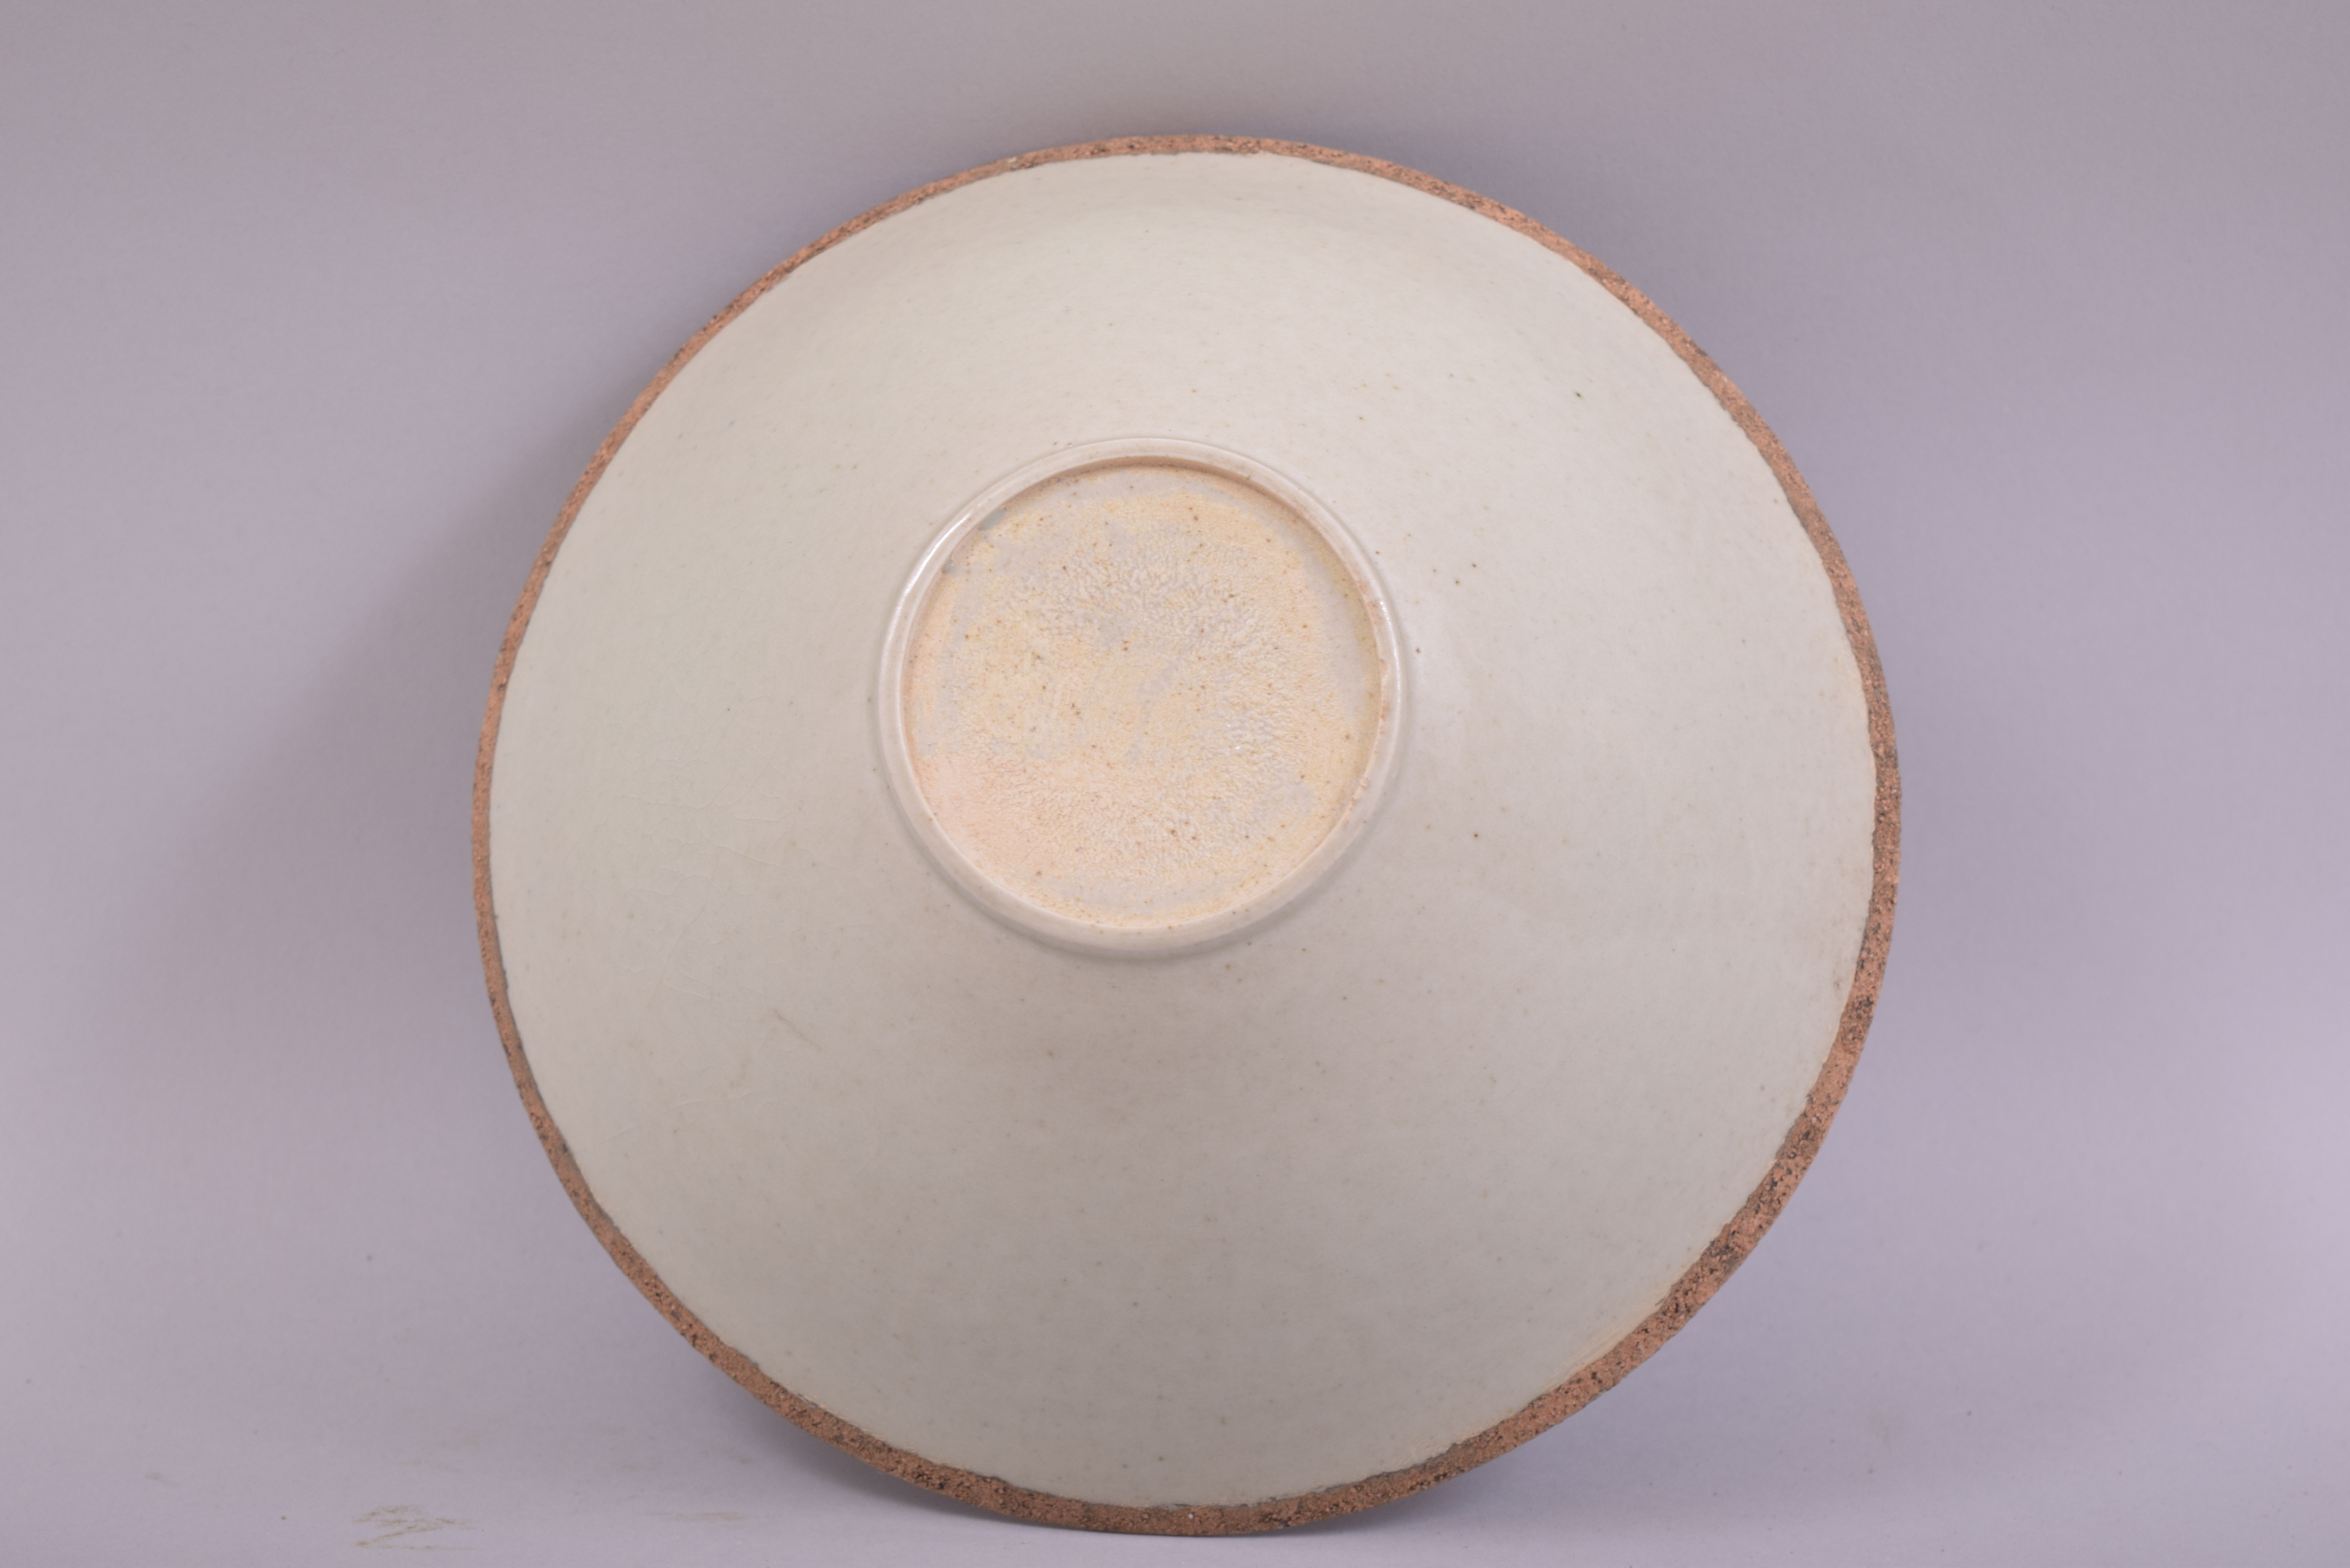 A CHINESE CELEDON GLAZED INCISED BOWL, the interior with carved floral decoration, 19.5cm diameter. - Image 3 of 3